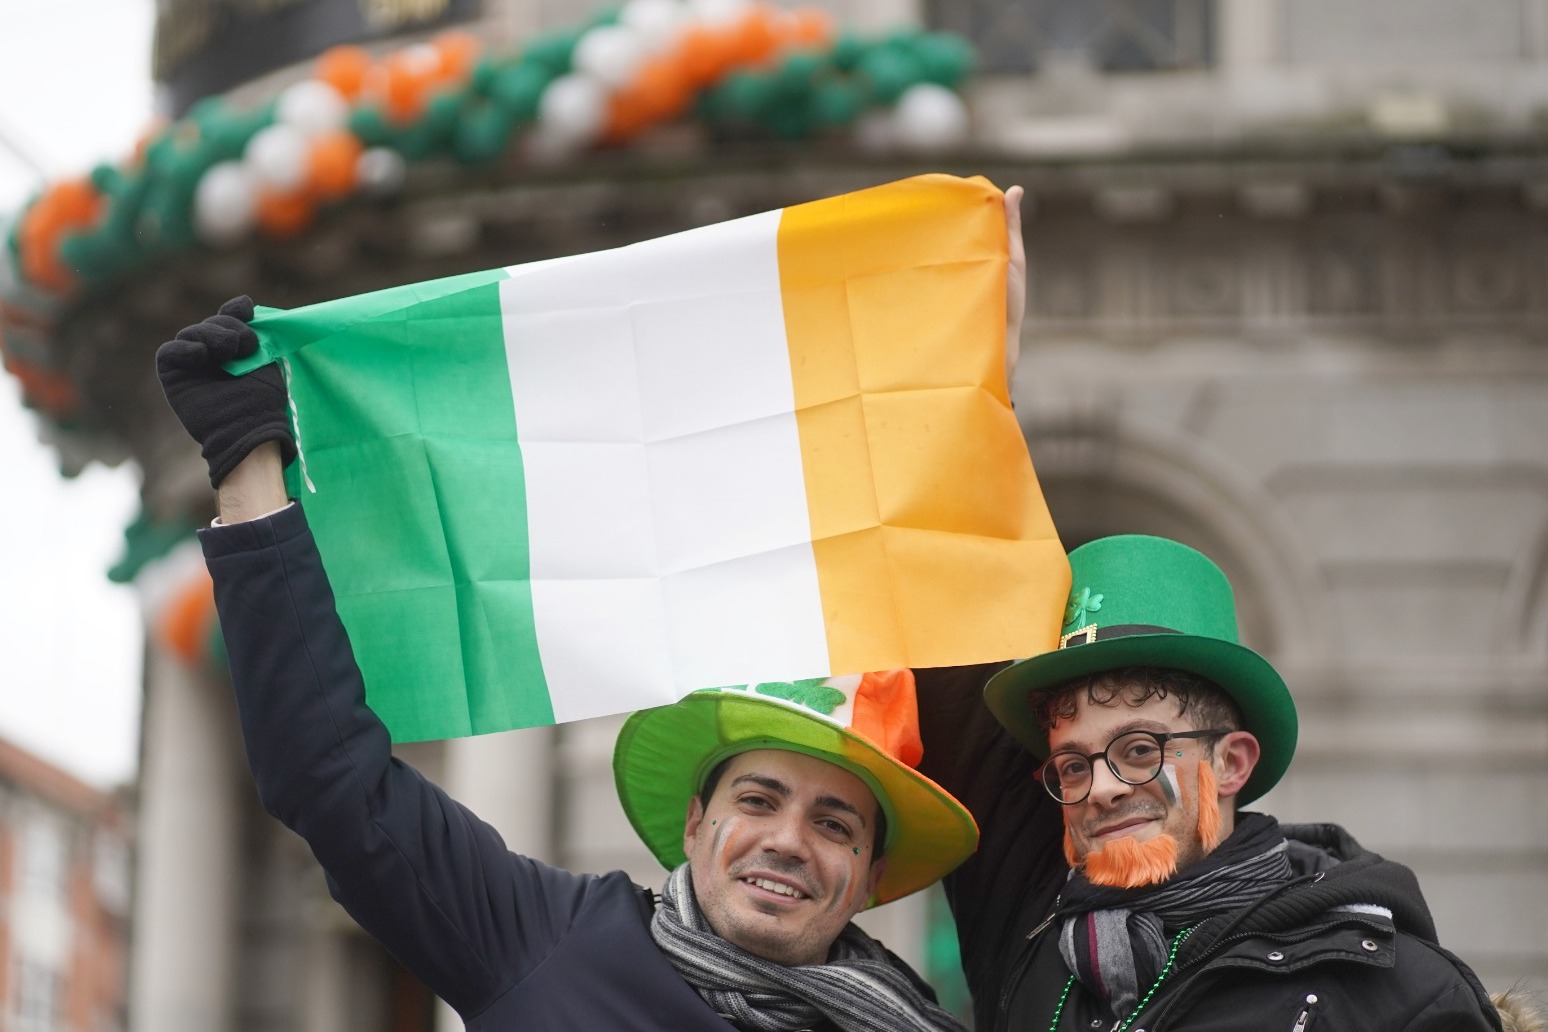 Half a million people expected to attend St Patrick’s Day parade in Dublin 